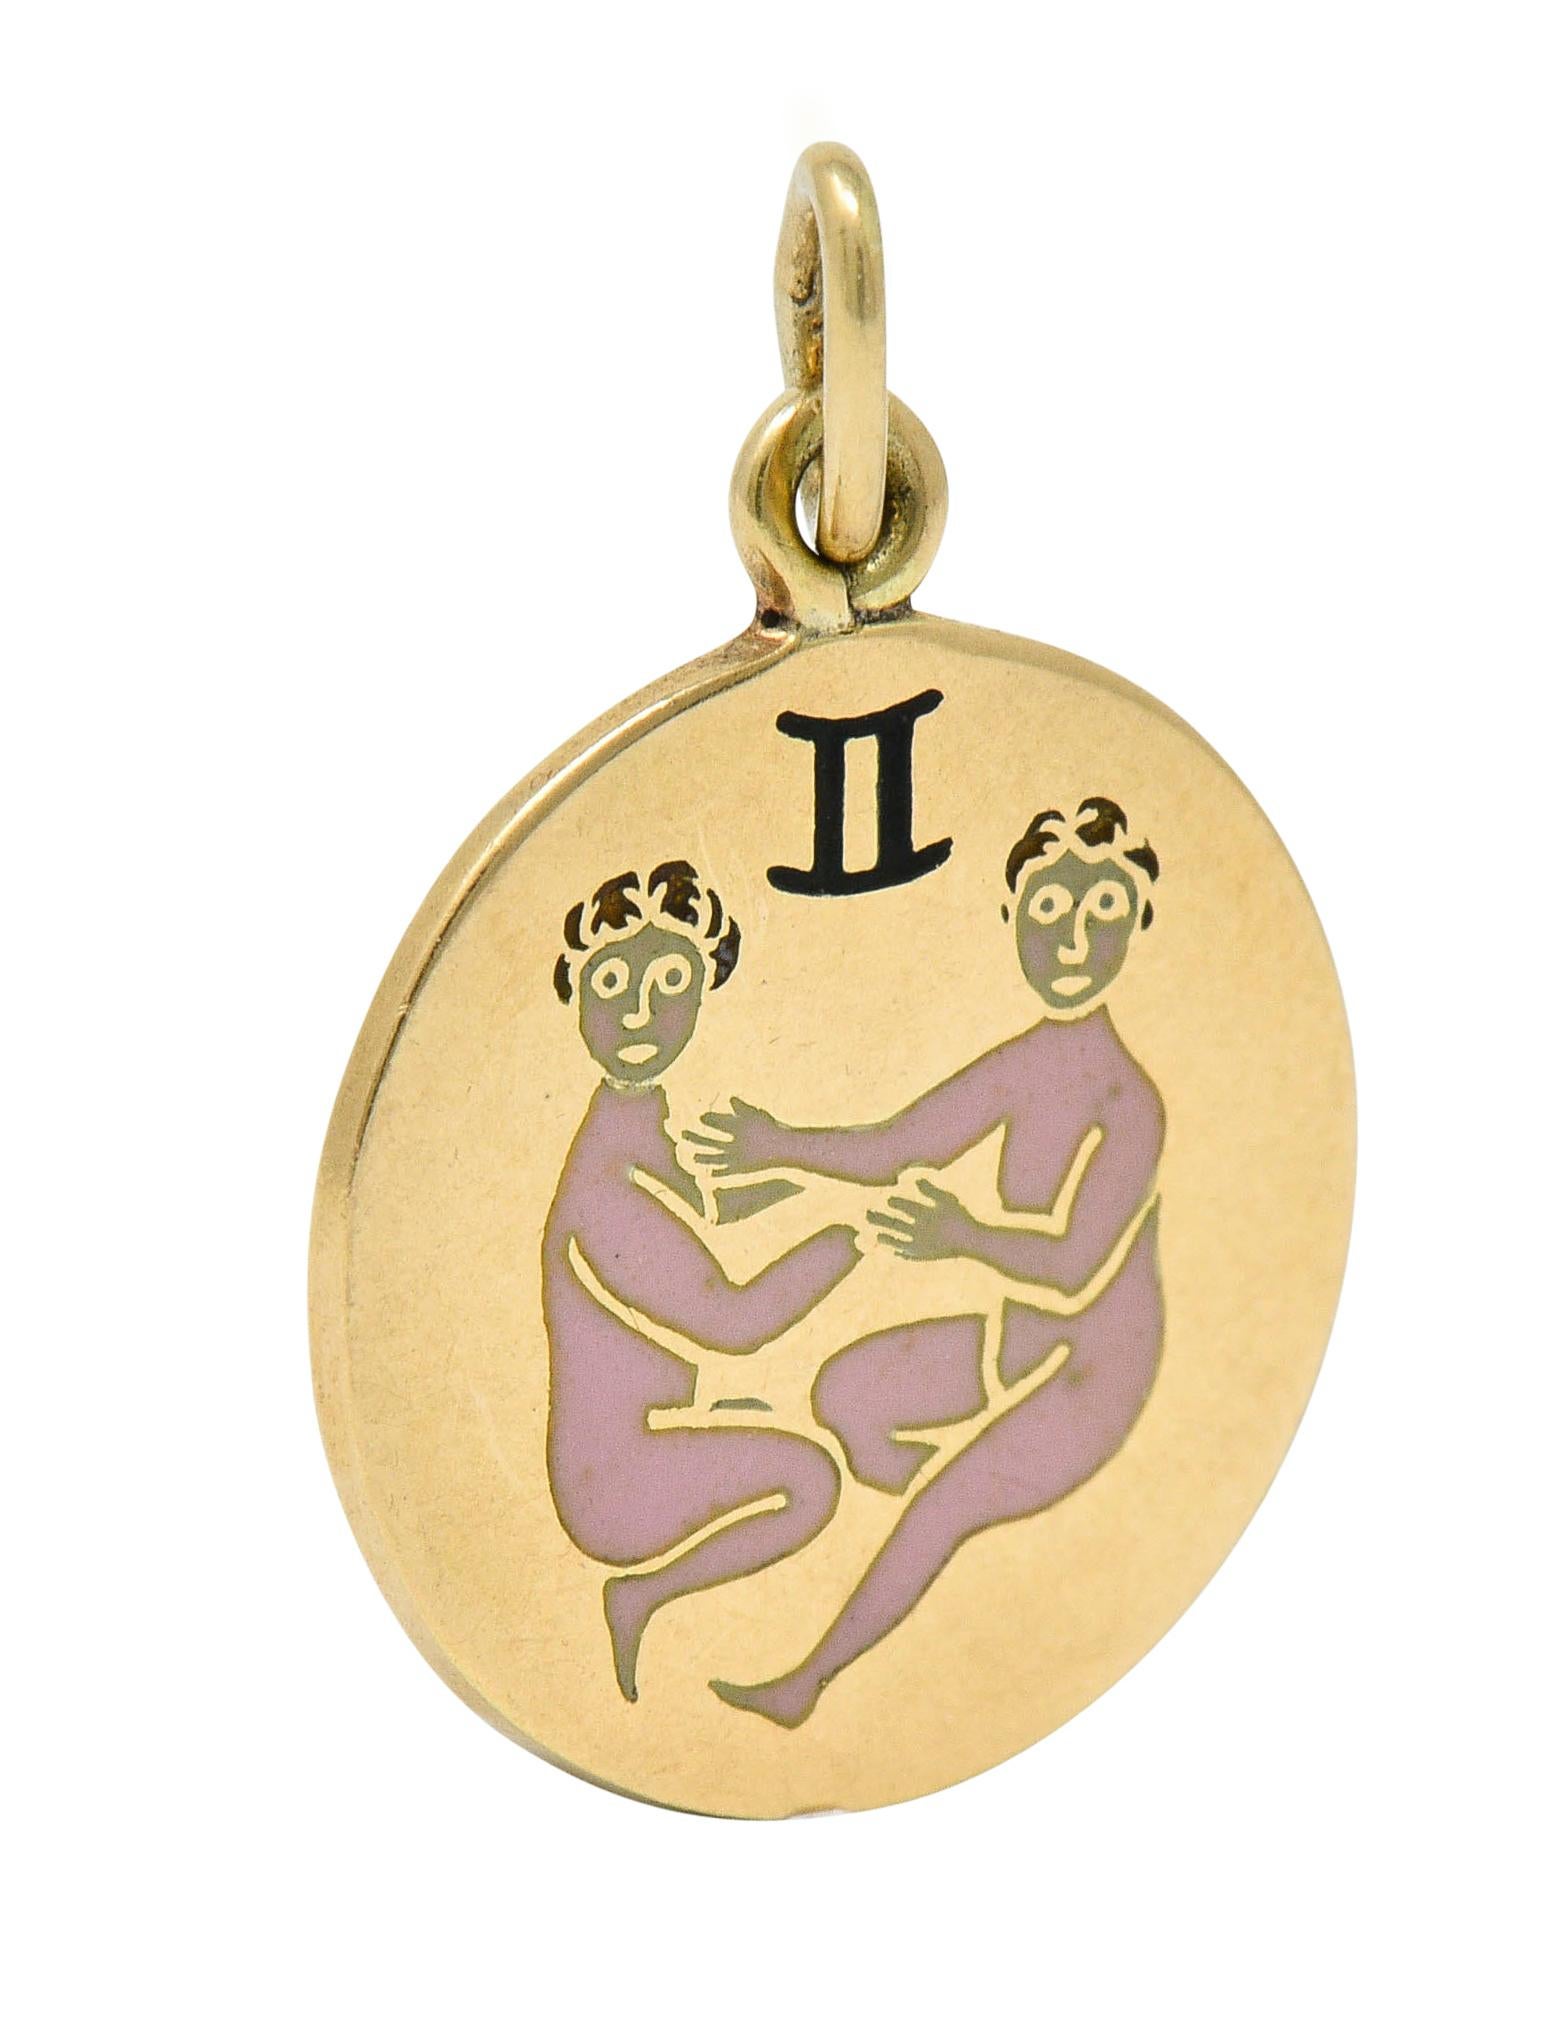 Circular charm depicts two boyish figures seated below the Gemini motif

With pink and black enamel details; exhibiting no loss

Back is inscribed with a dated inscription

Stamped 14K for 14 karat gold

Maker's mark for Richardson Manufacturing